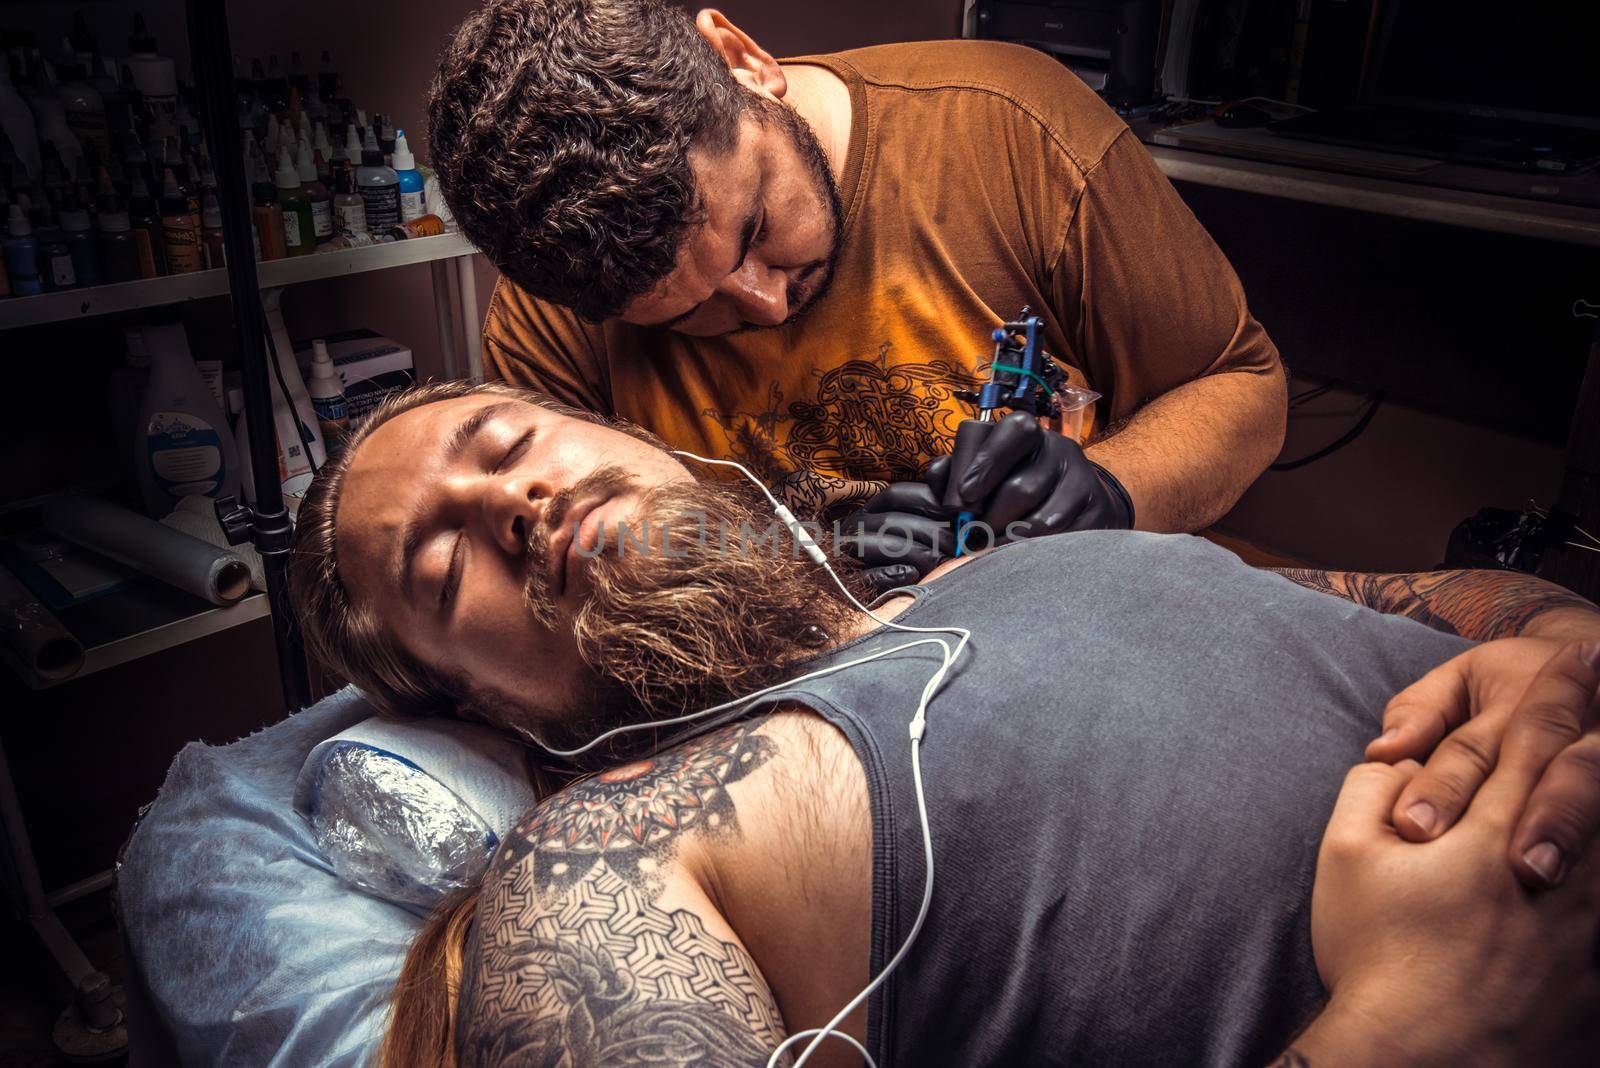 Tattooer works in tattoo parlor by Proff